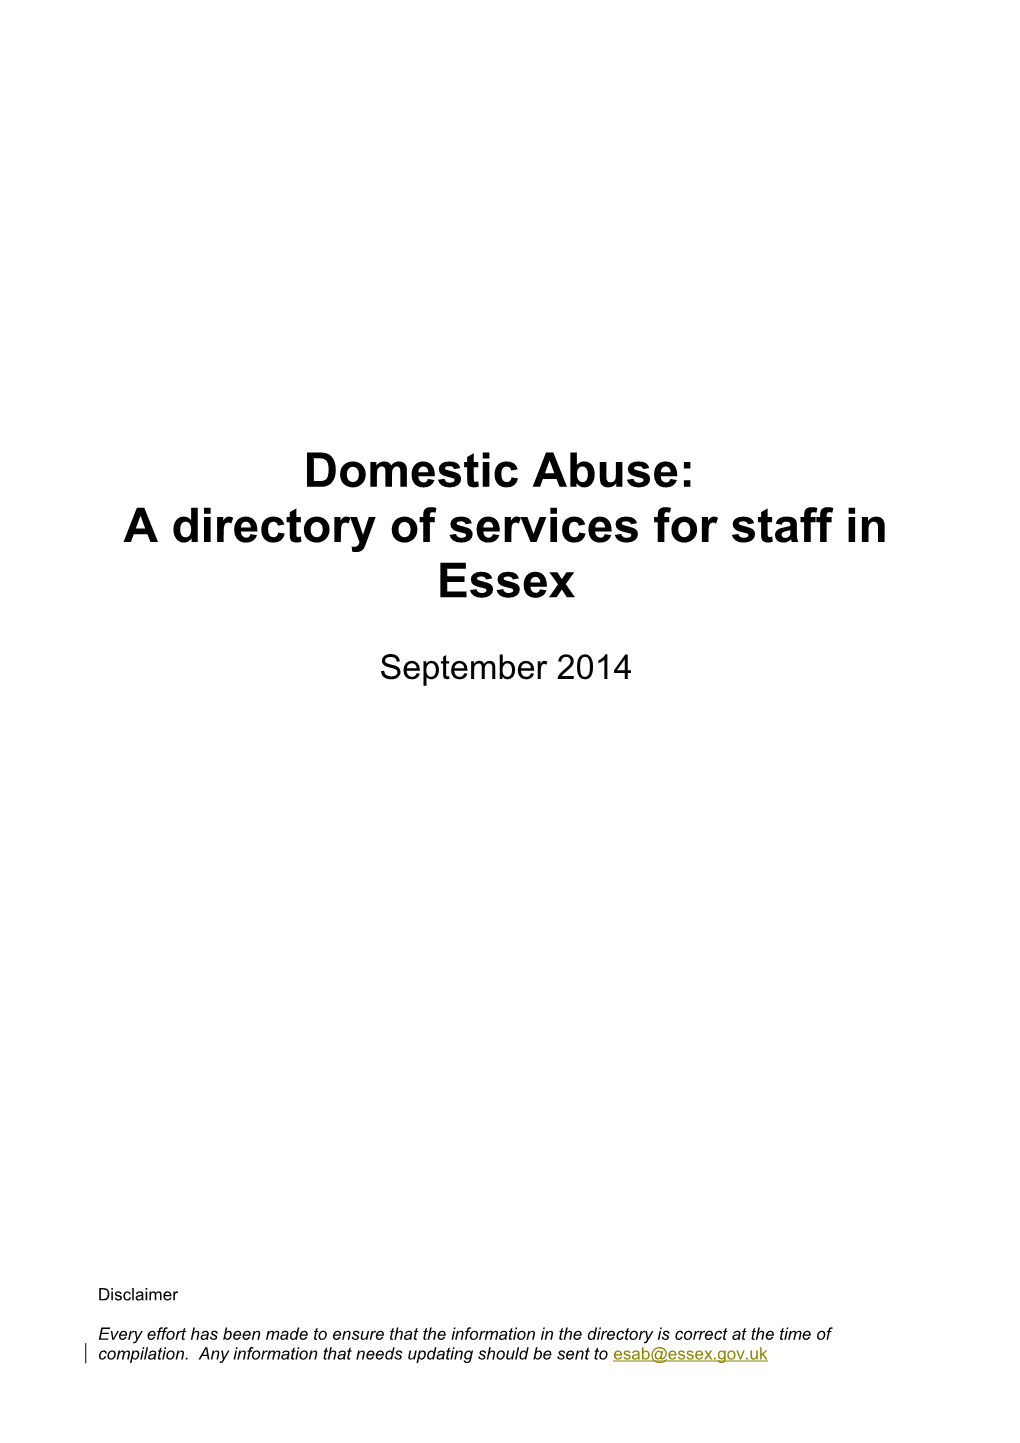 A Directory of Services for Staff in Essex